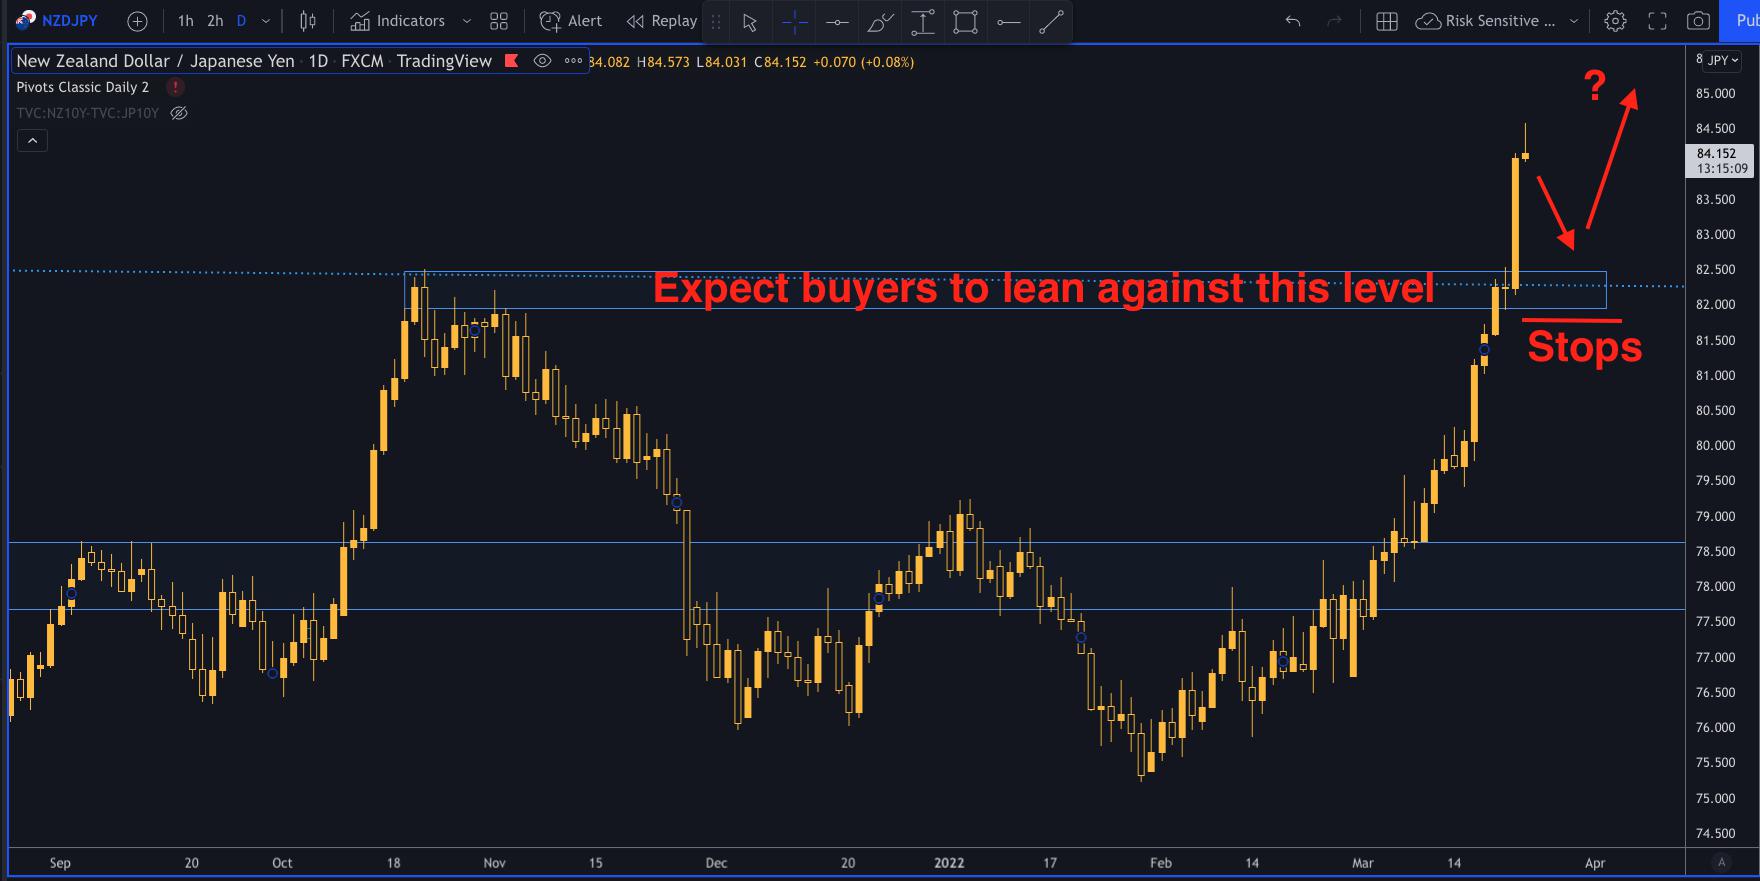 NZD/JPY: Expect buyers on the dips